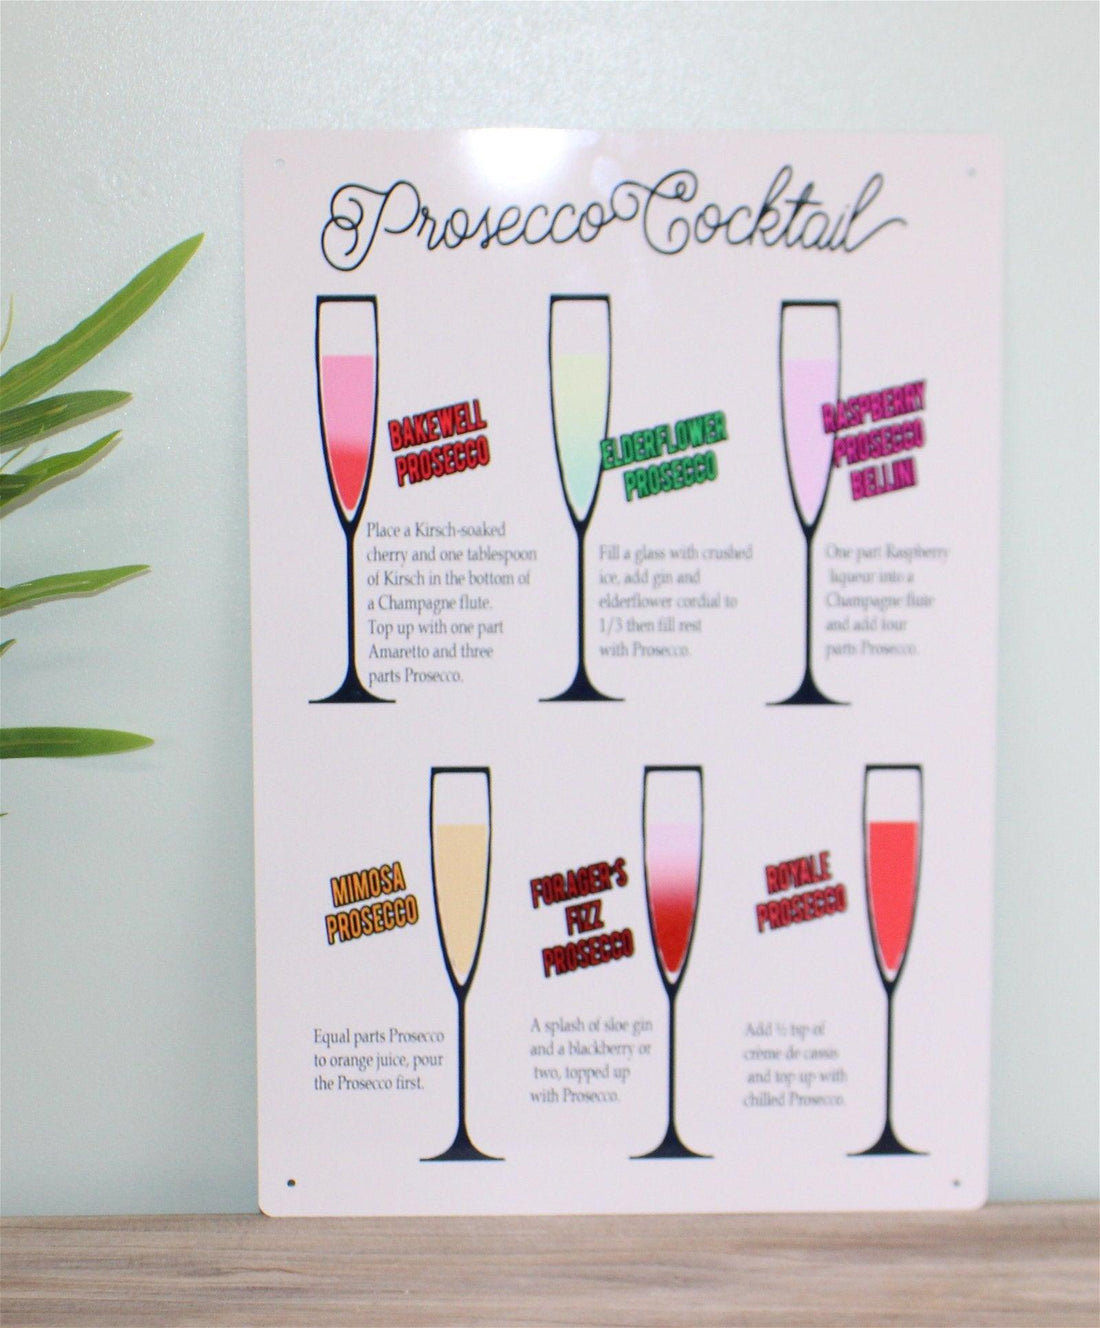 Vintage Metal Sign - Classic Cocktail Prosecco Recipes - £27.99 - Metal Sign 